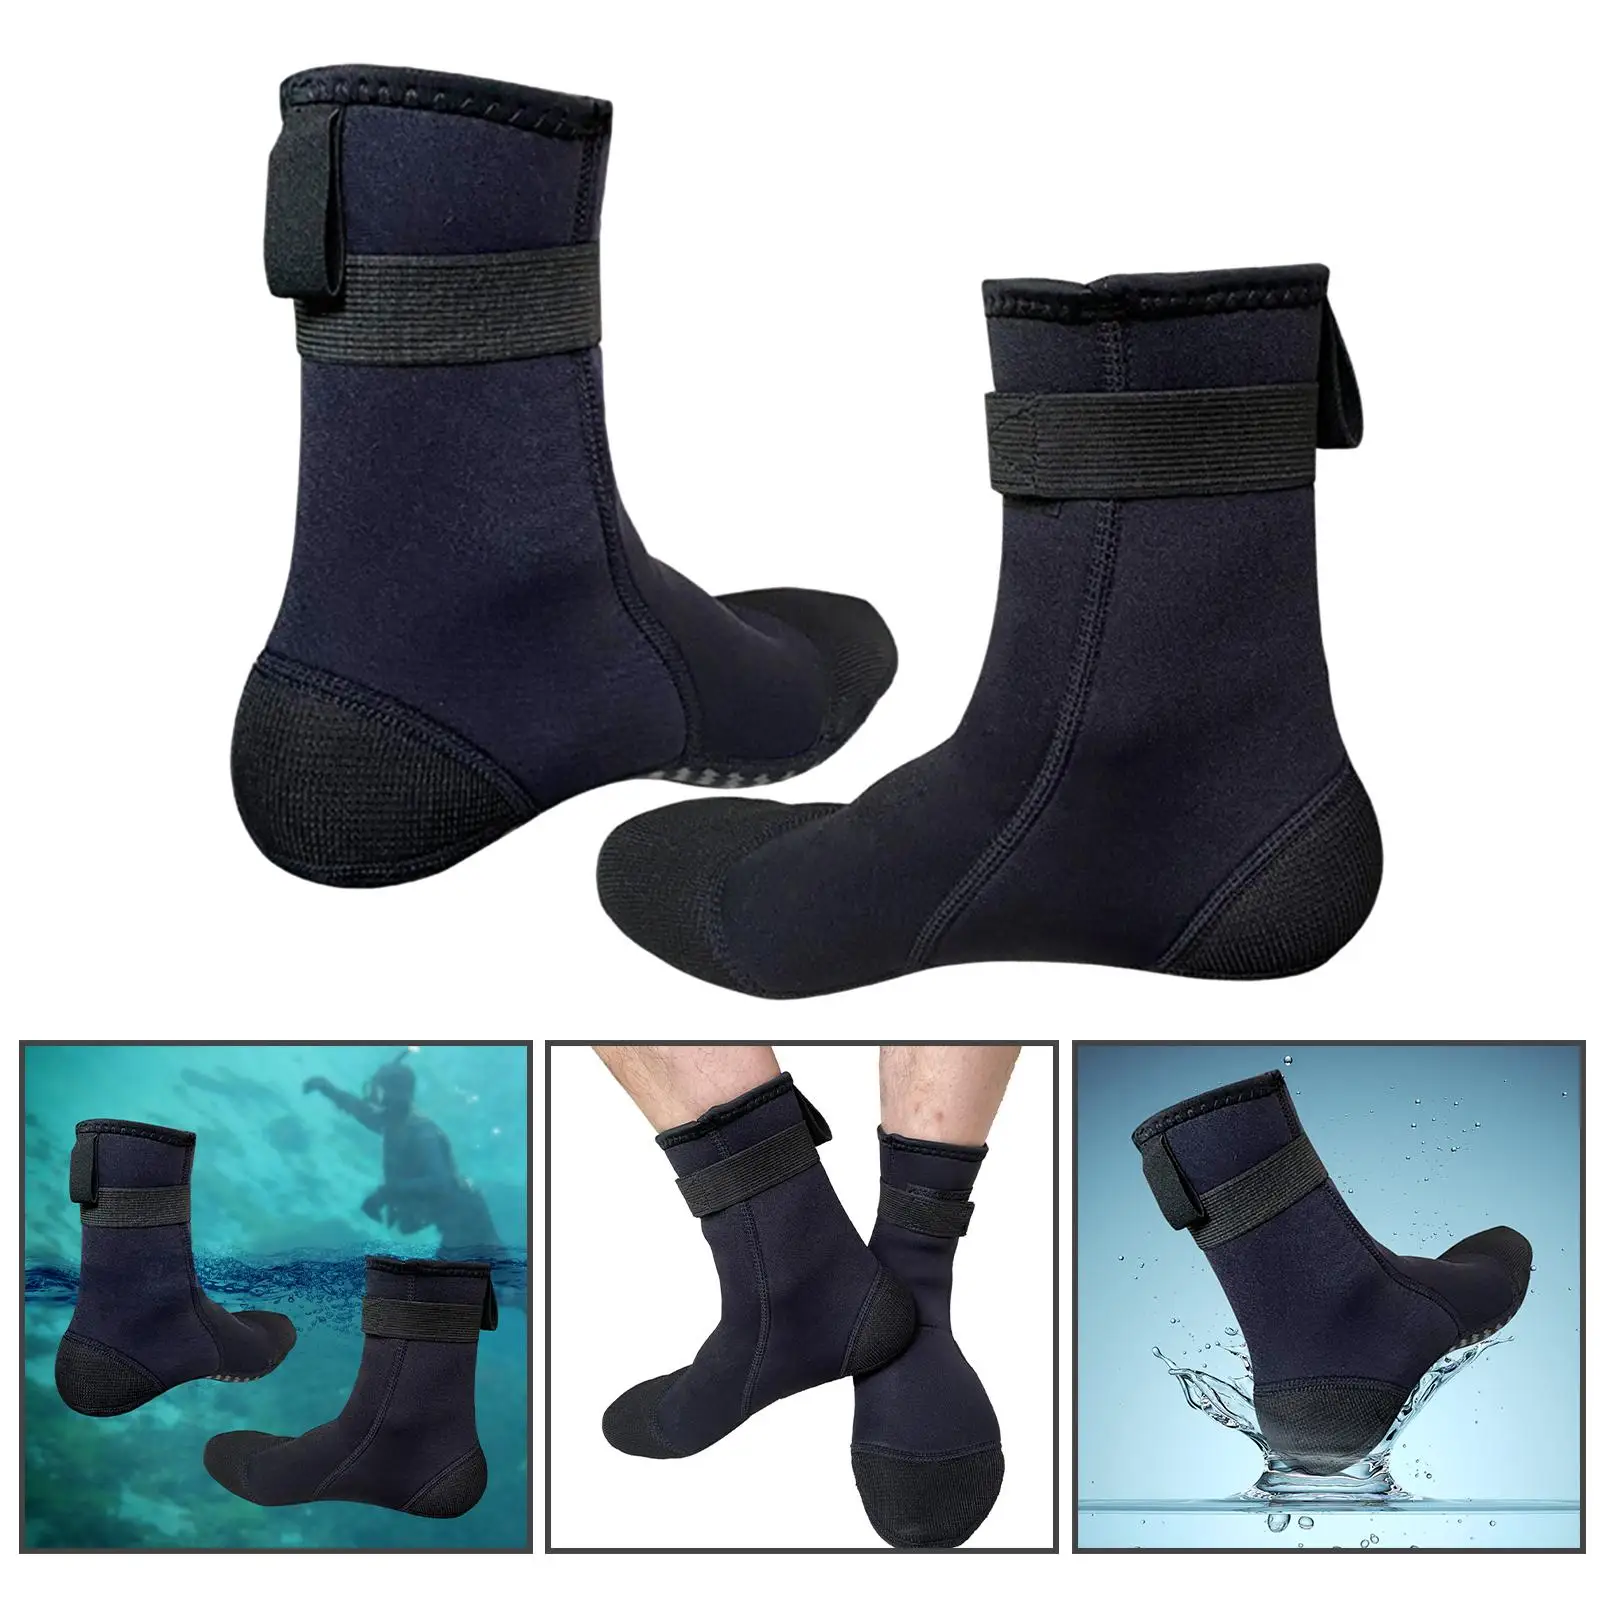 2 Pieces 3mm Neoprene Socks Glued Stitched Diving Socks Nonslip Strech Wetsuit Socks for Water Sports Swimming Paddling